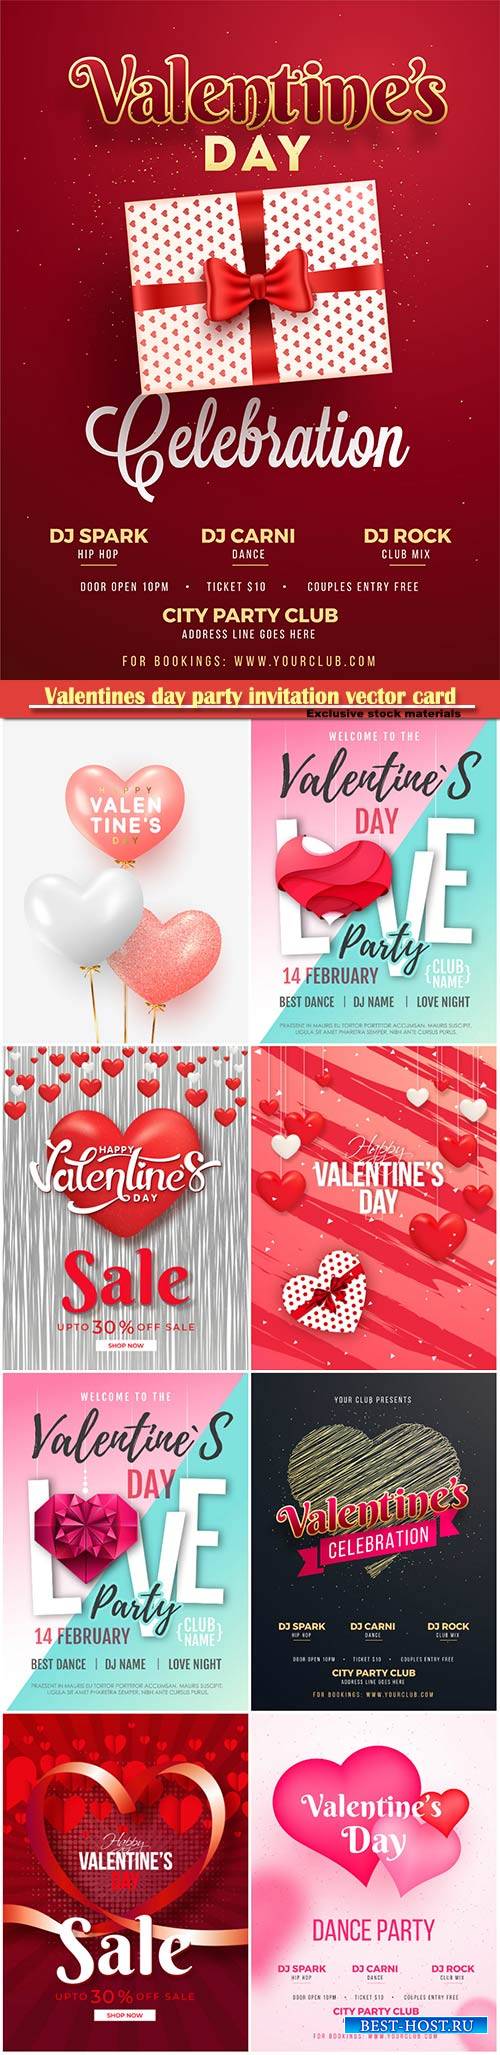 Valentines day party invitation vector card # 46